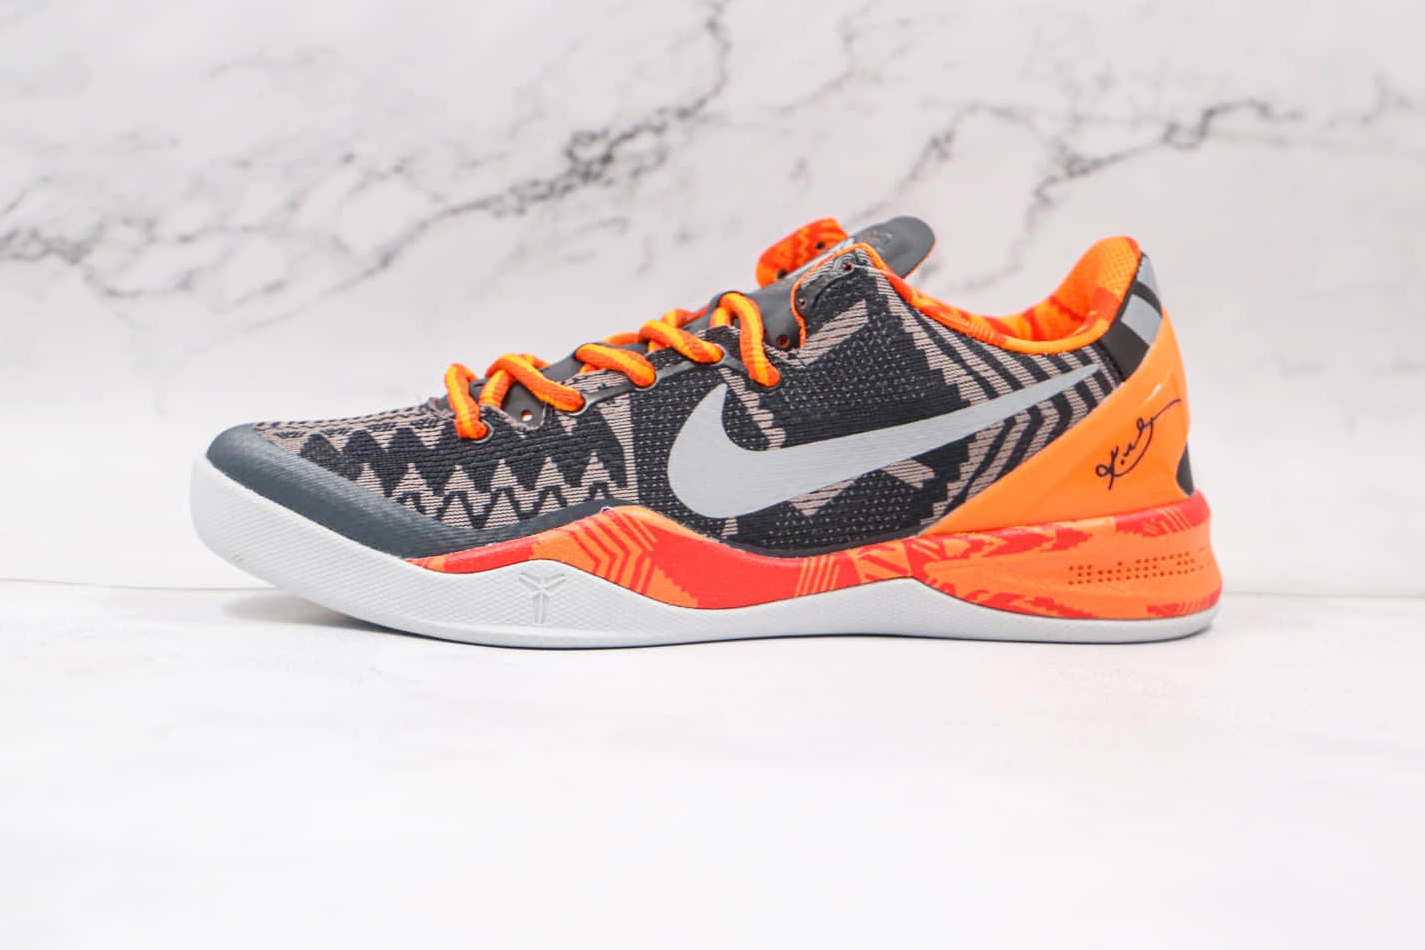 Nike Kobe 8 System 'Black History Month' 583112-001: Shop Exclusive Sneakers Now